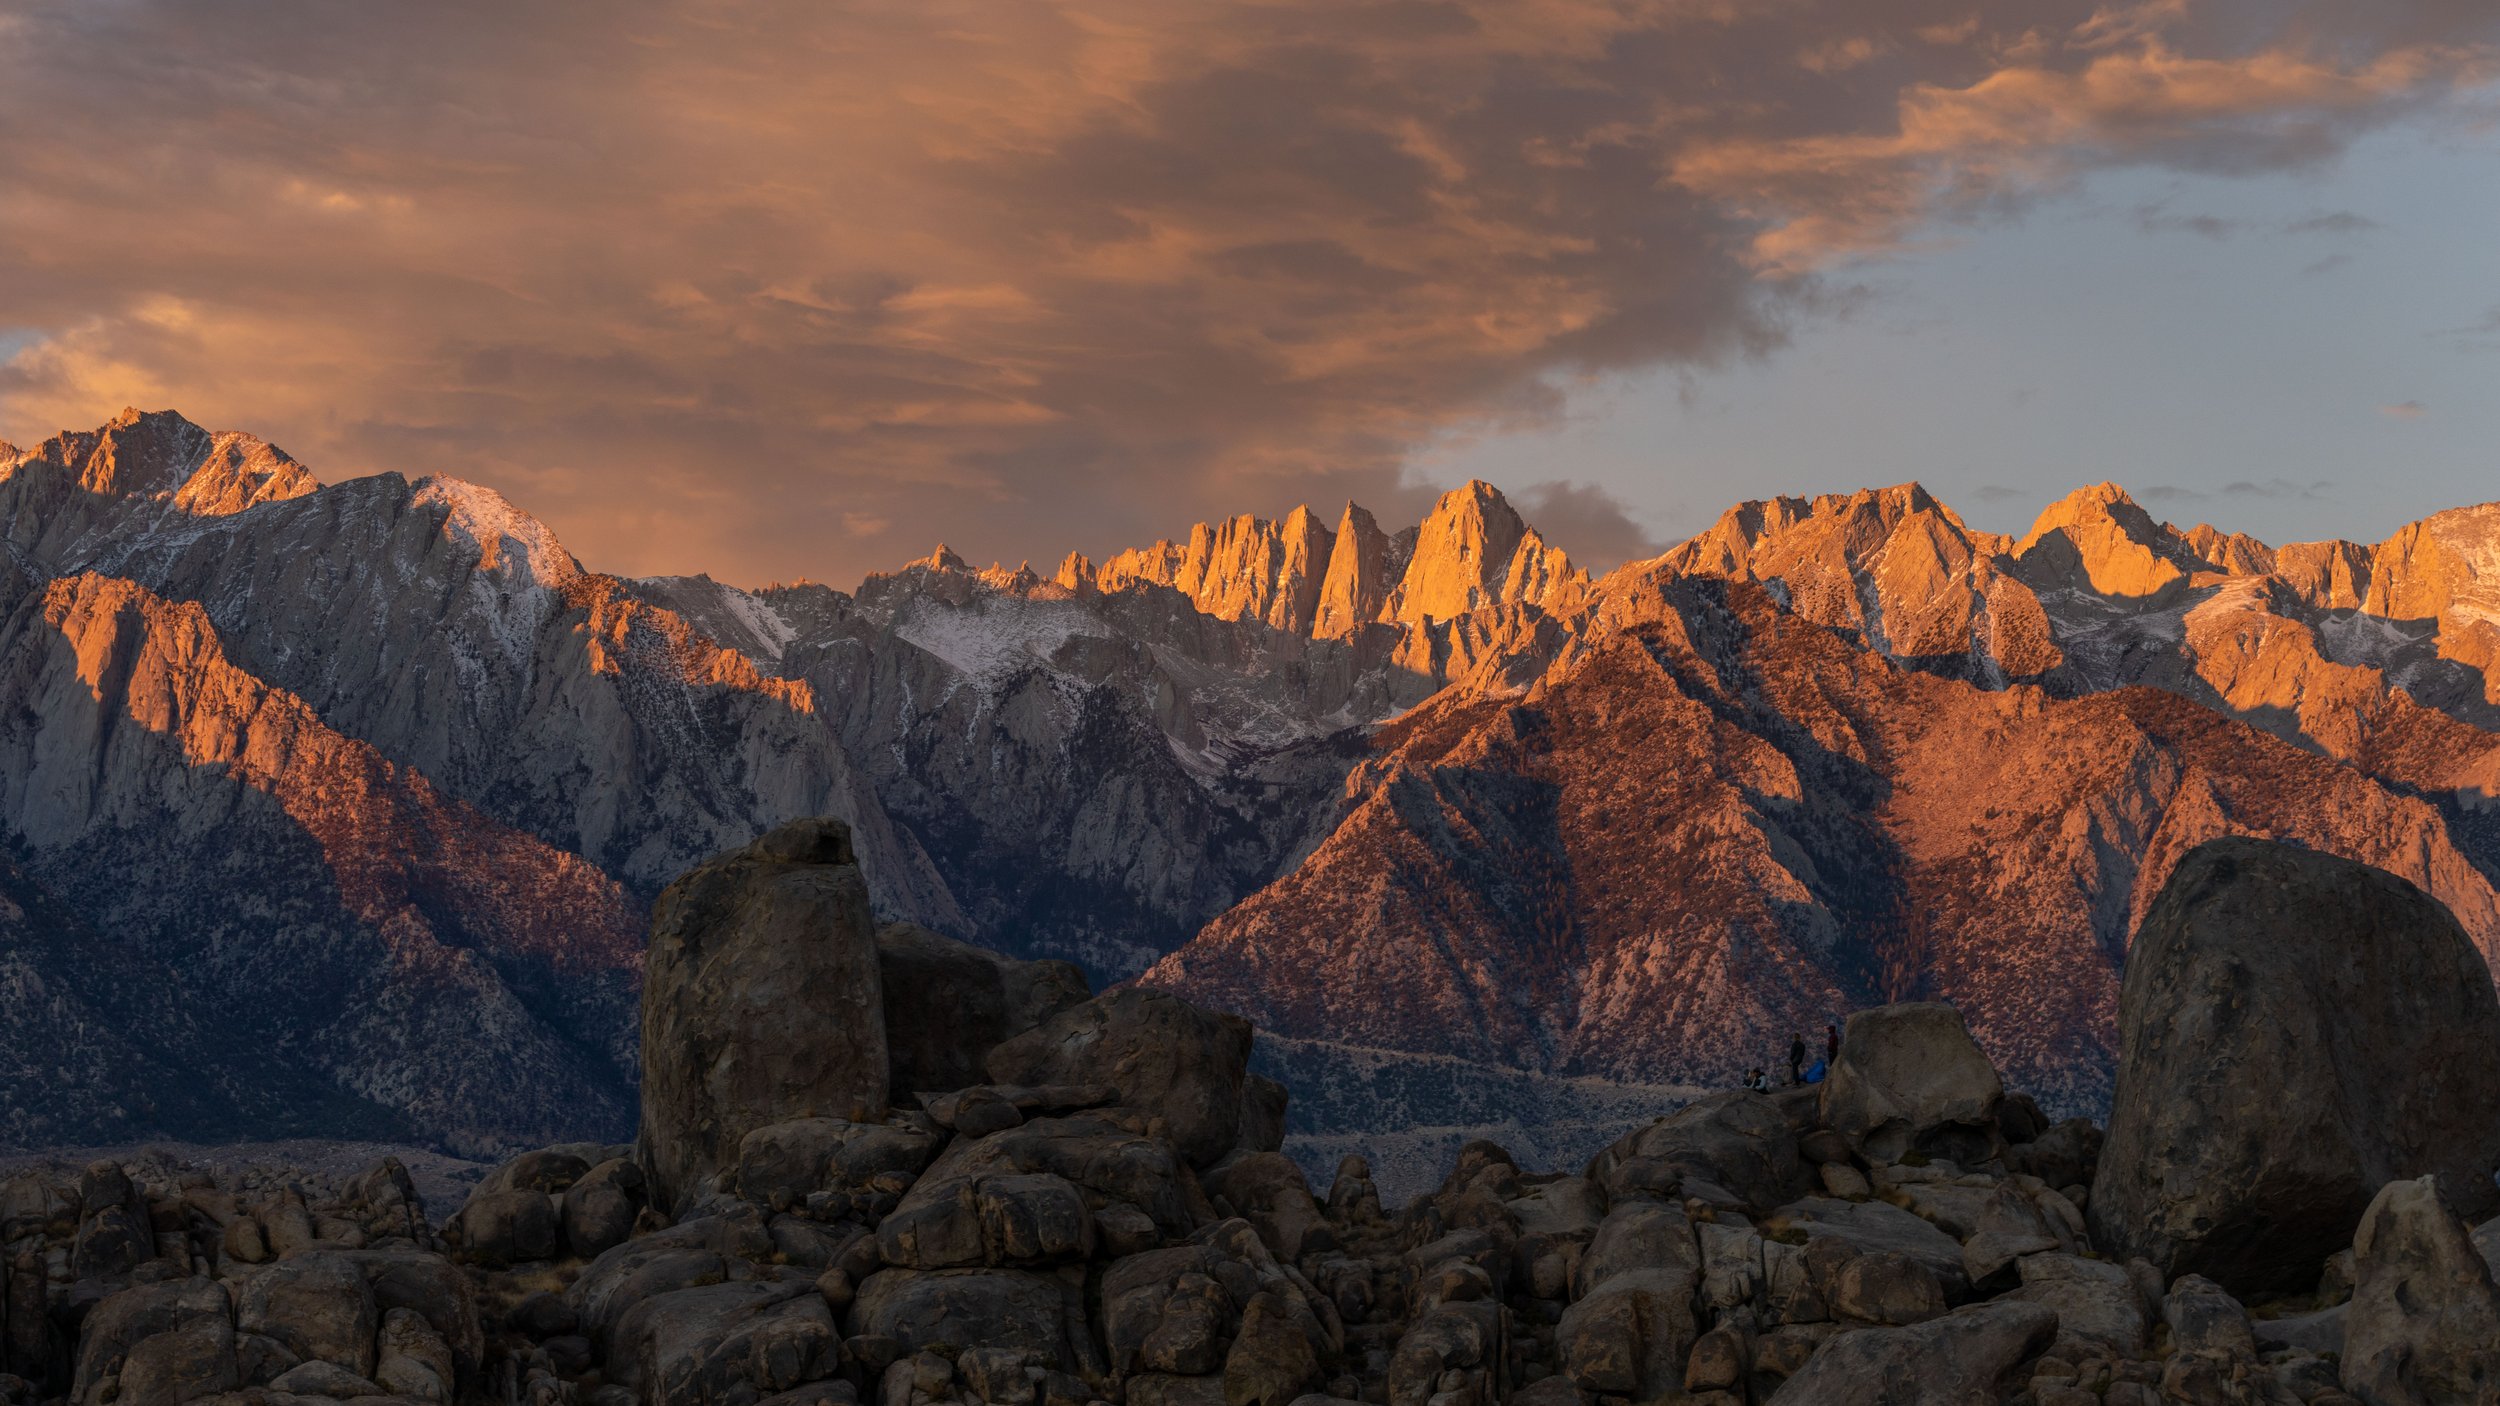 Mt. Whitney from the Alabama Hills